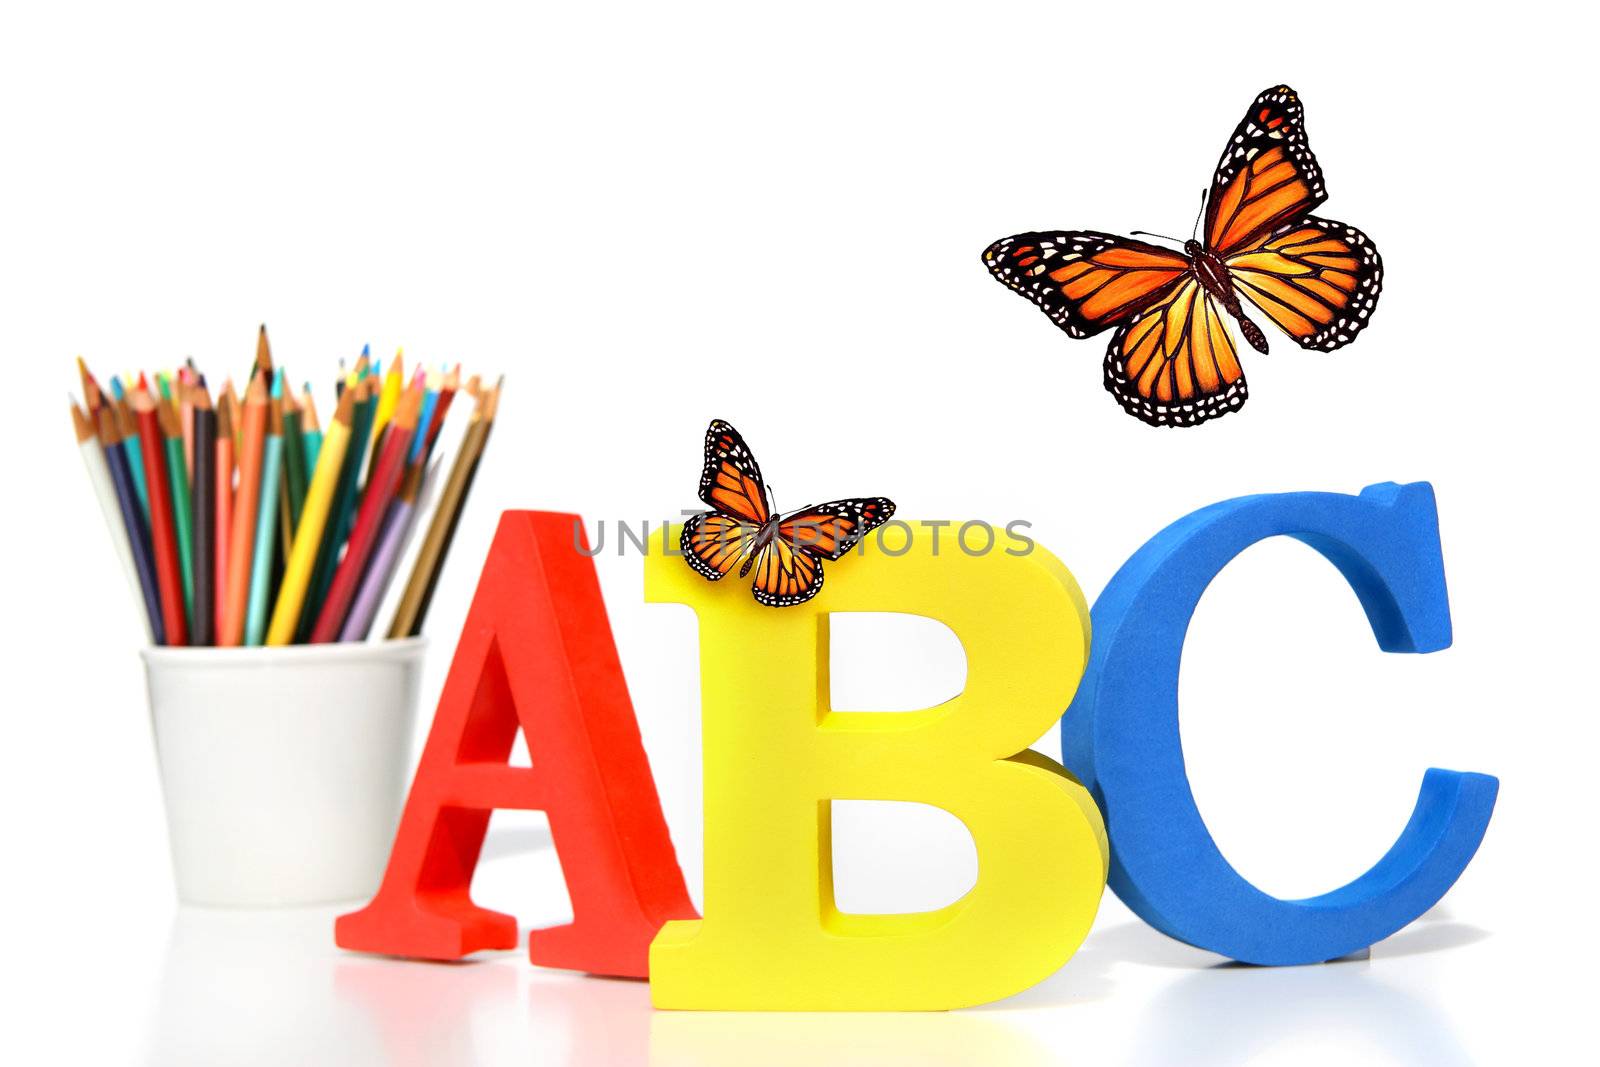 ABC letters with pencils on white background